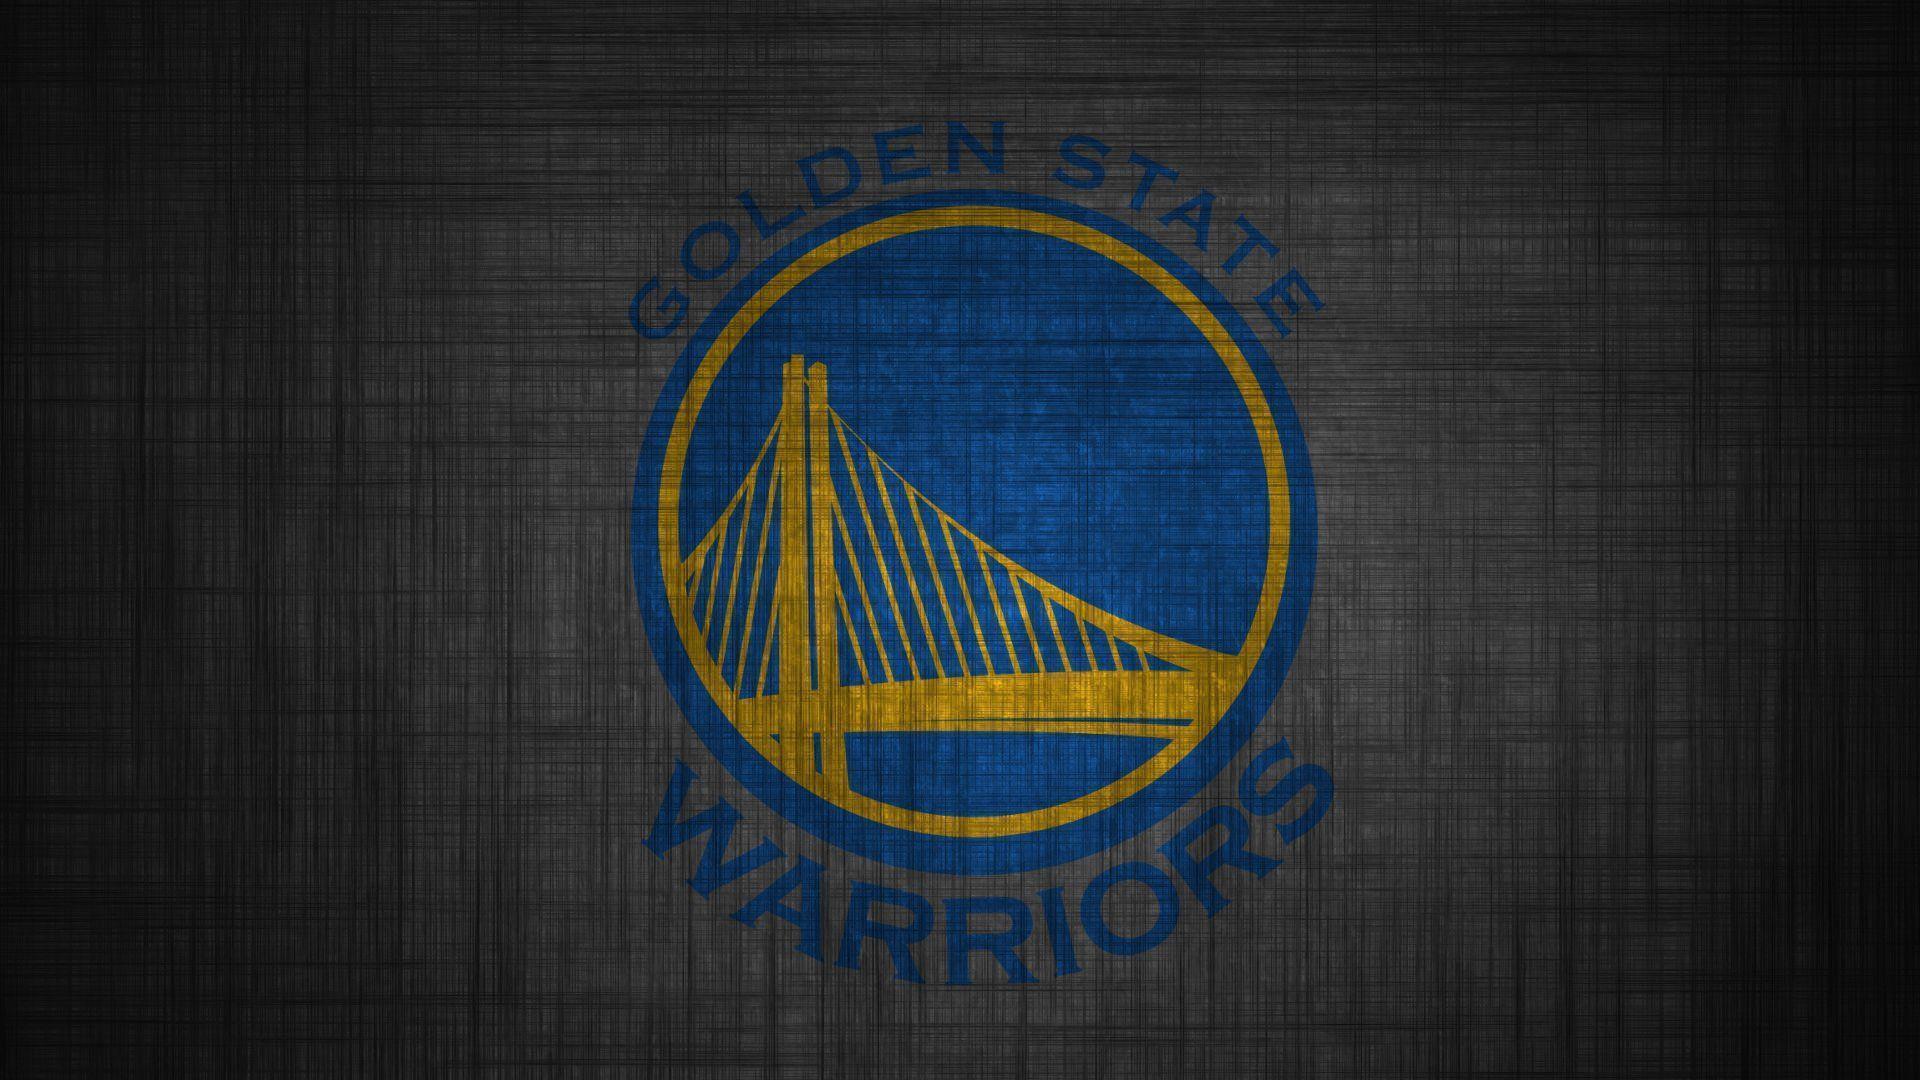 golden state warriors wallpapers image